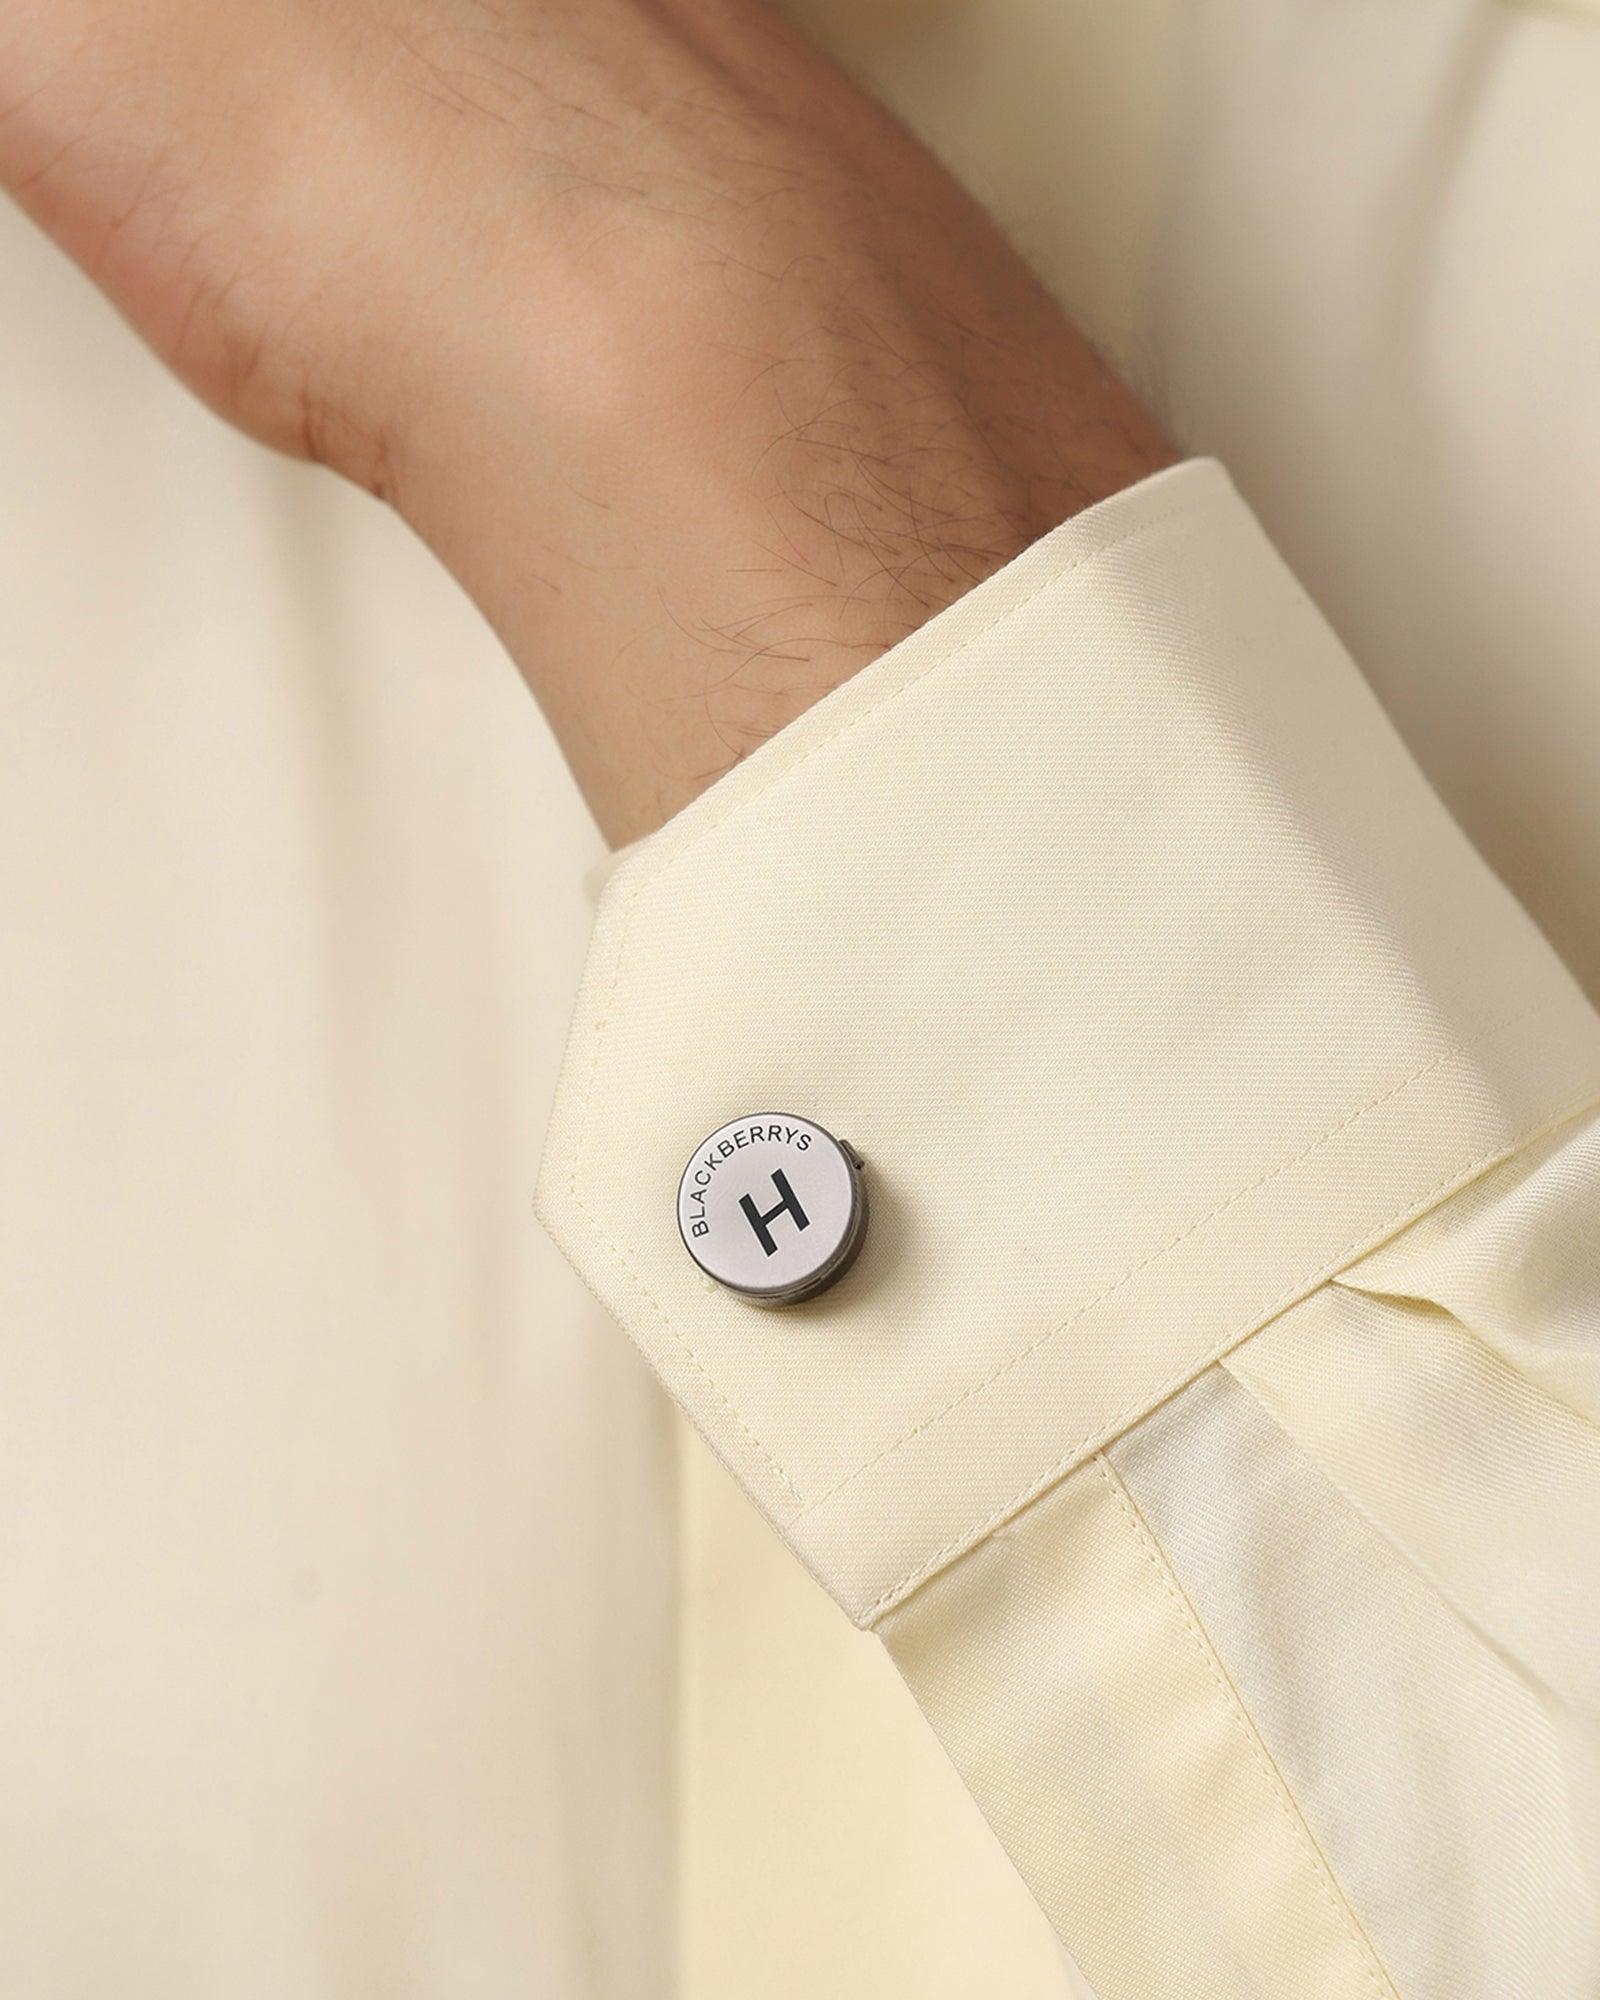 Personalised Shirt Button Cover With Alphabetic Initial-H